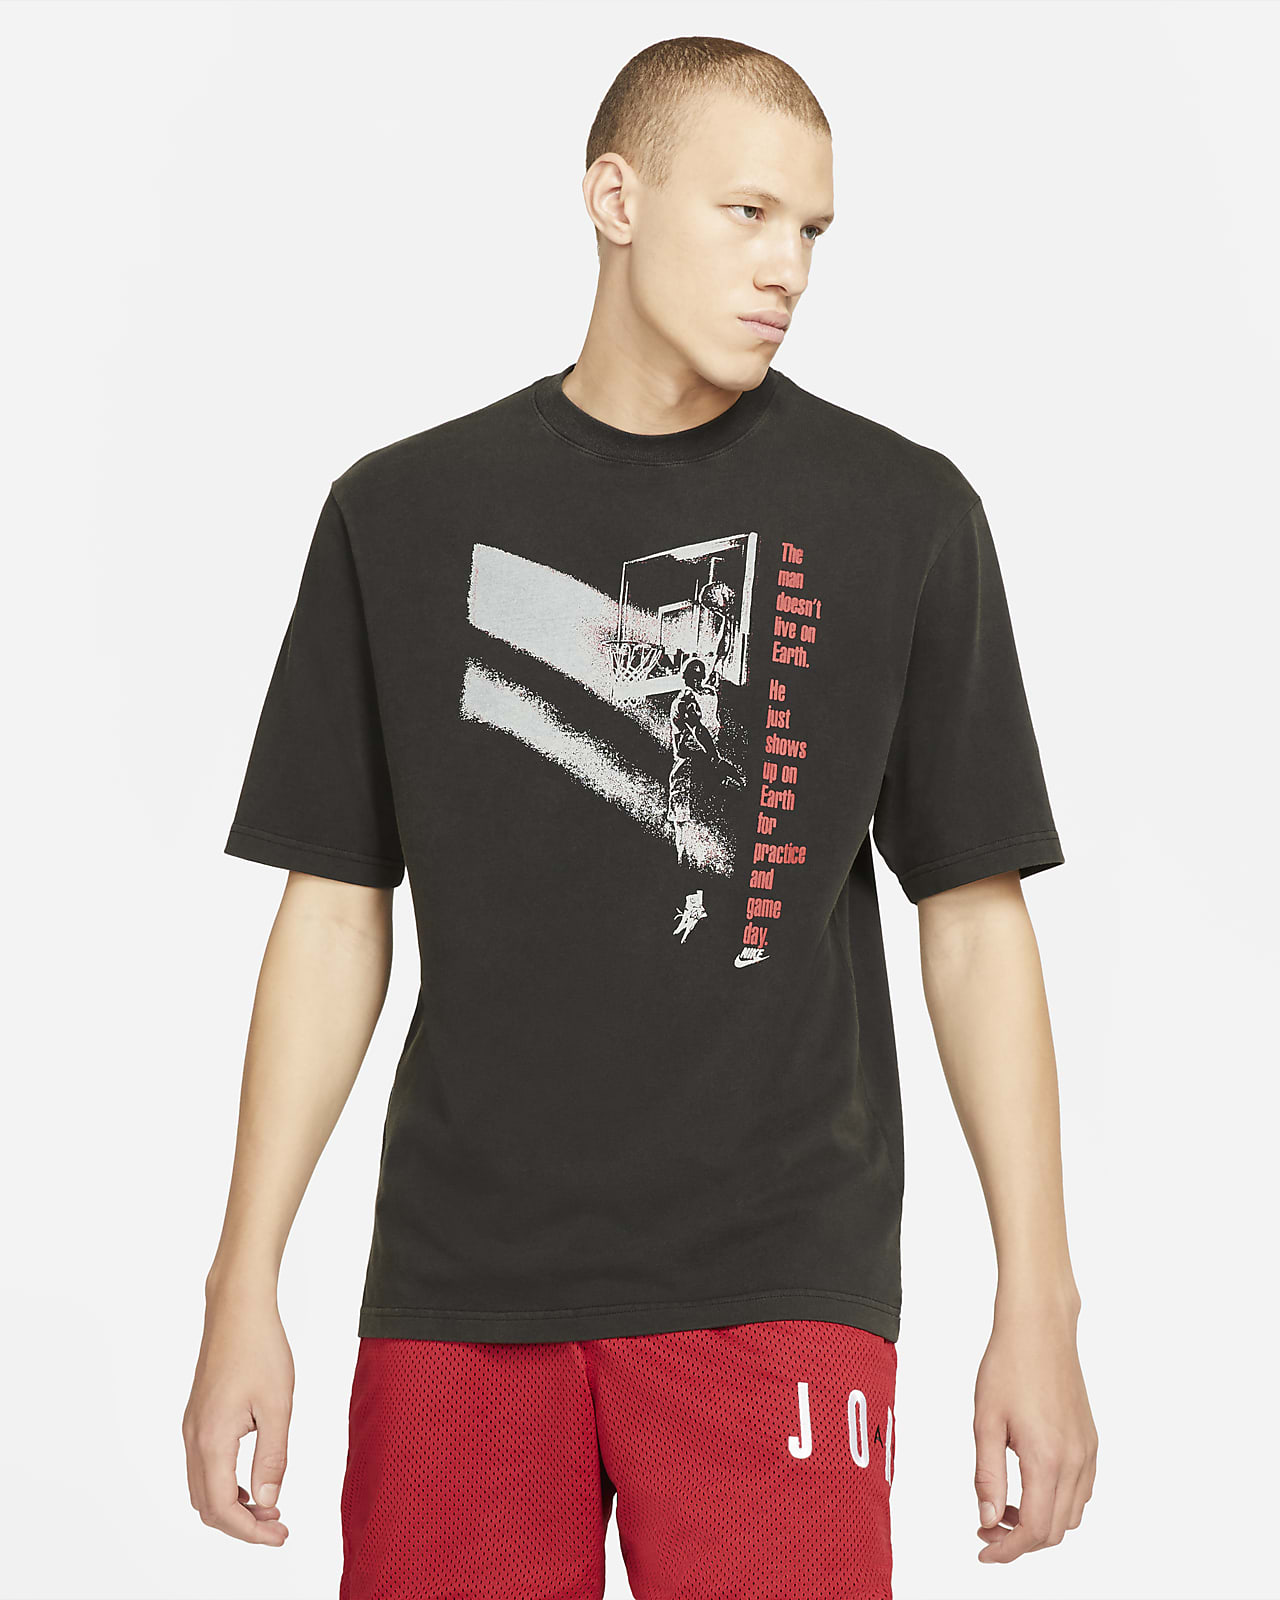 the flight series from nike tee